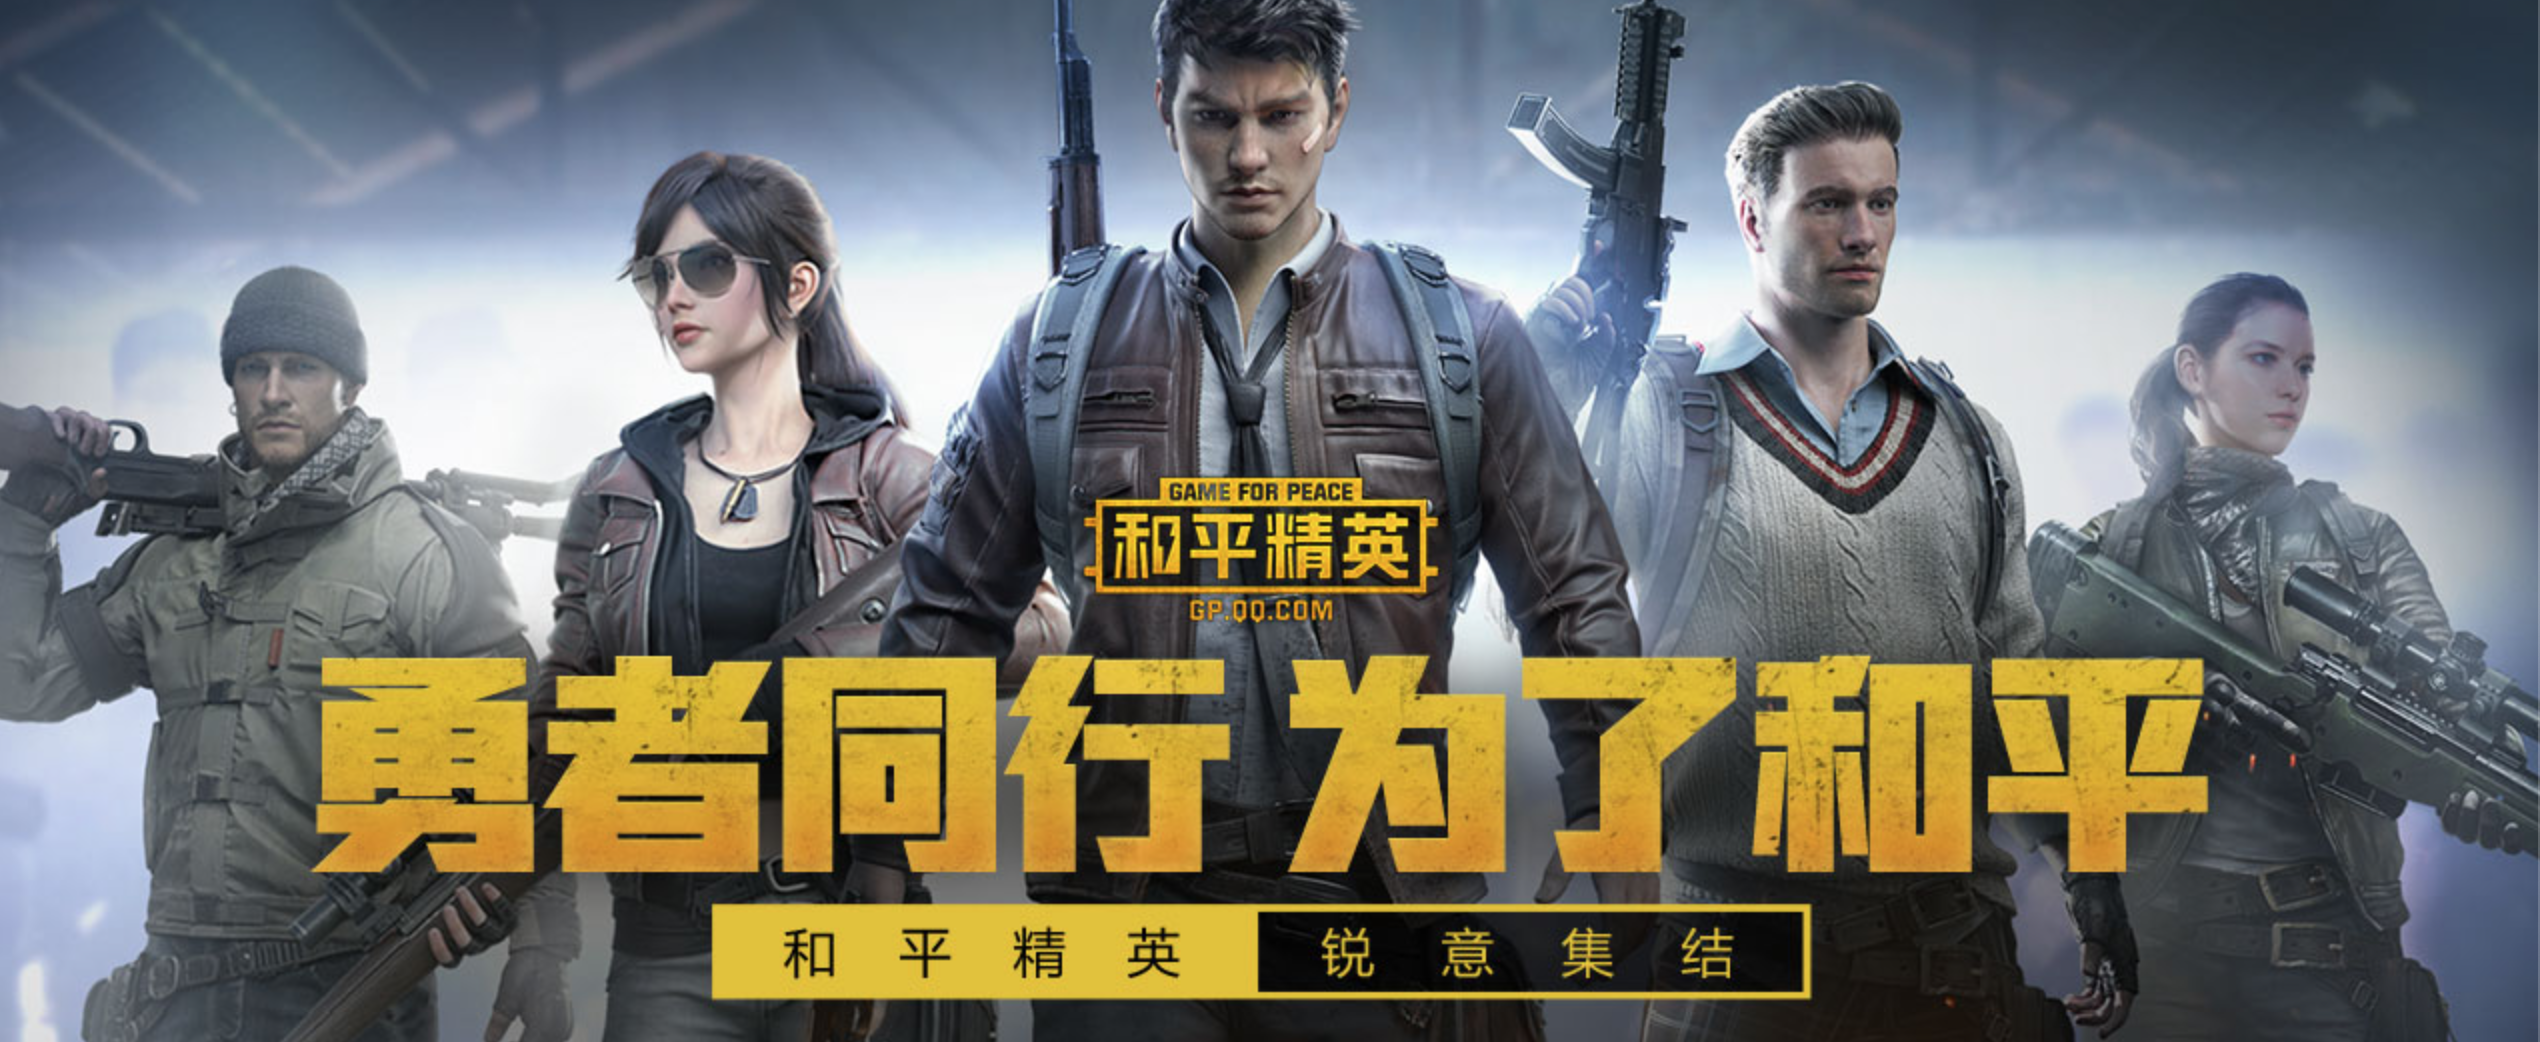 Tencent’s PUBG Mobile clone Game for Peace rakes in USD 14 million in three days